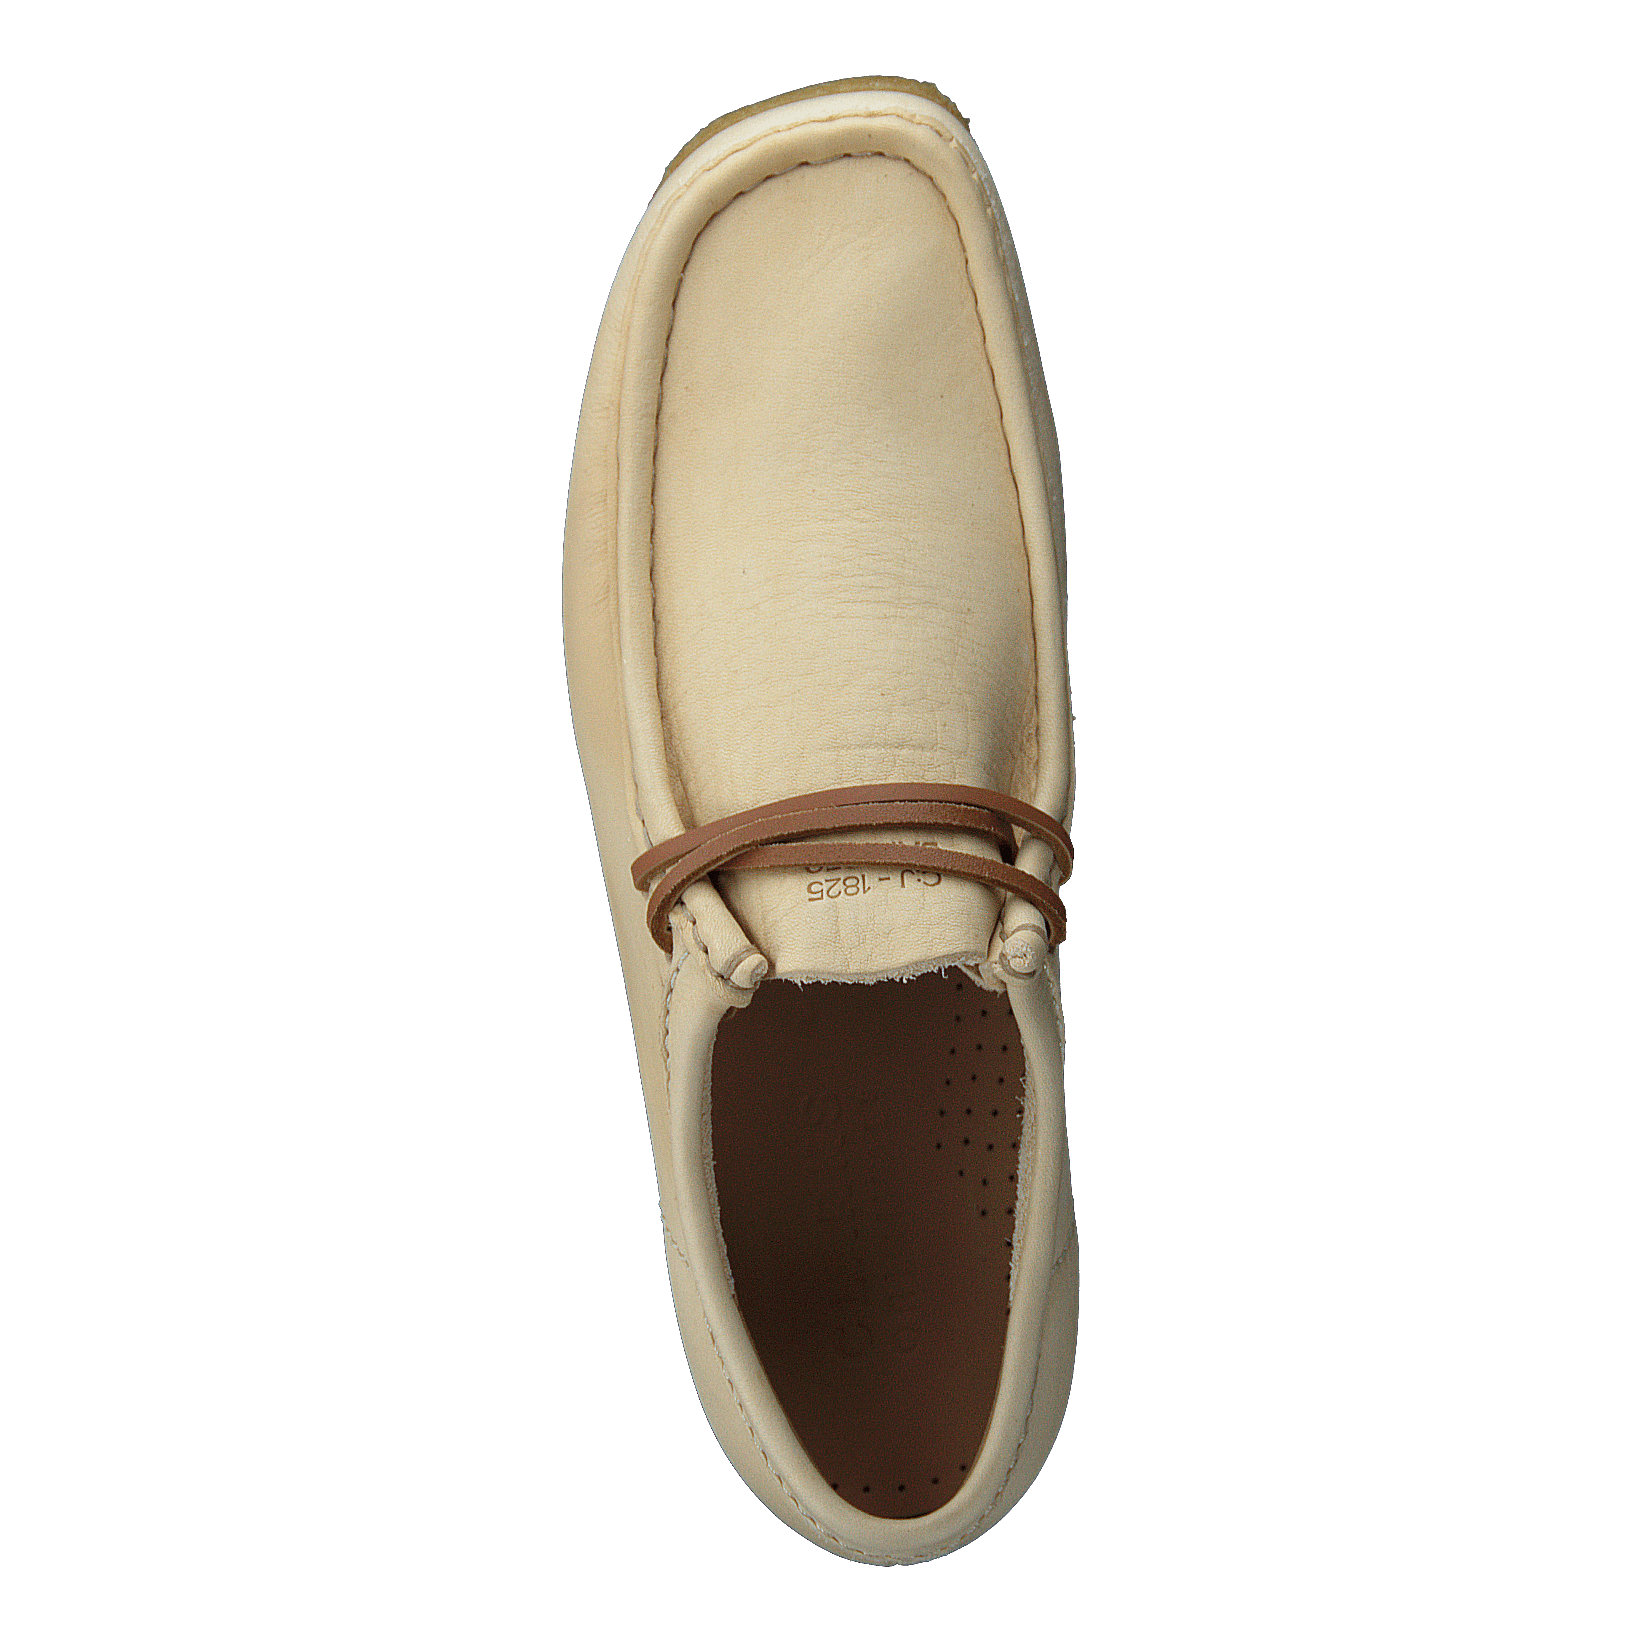 Wallabee G Natural Leather